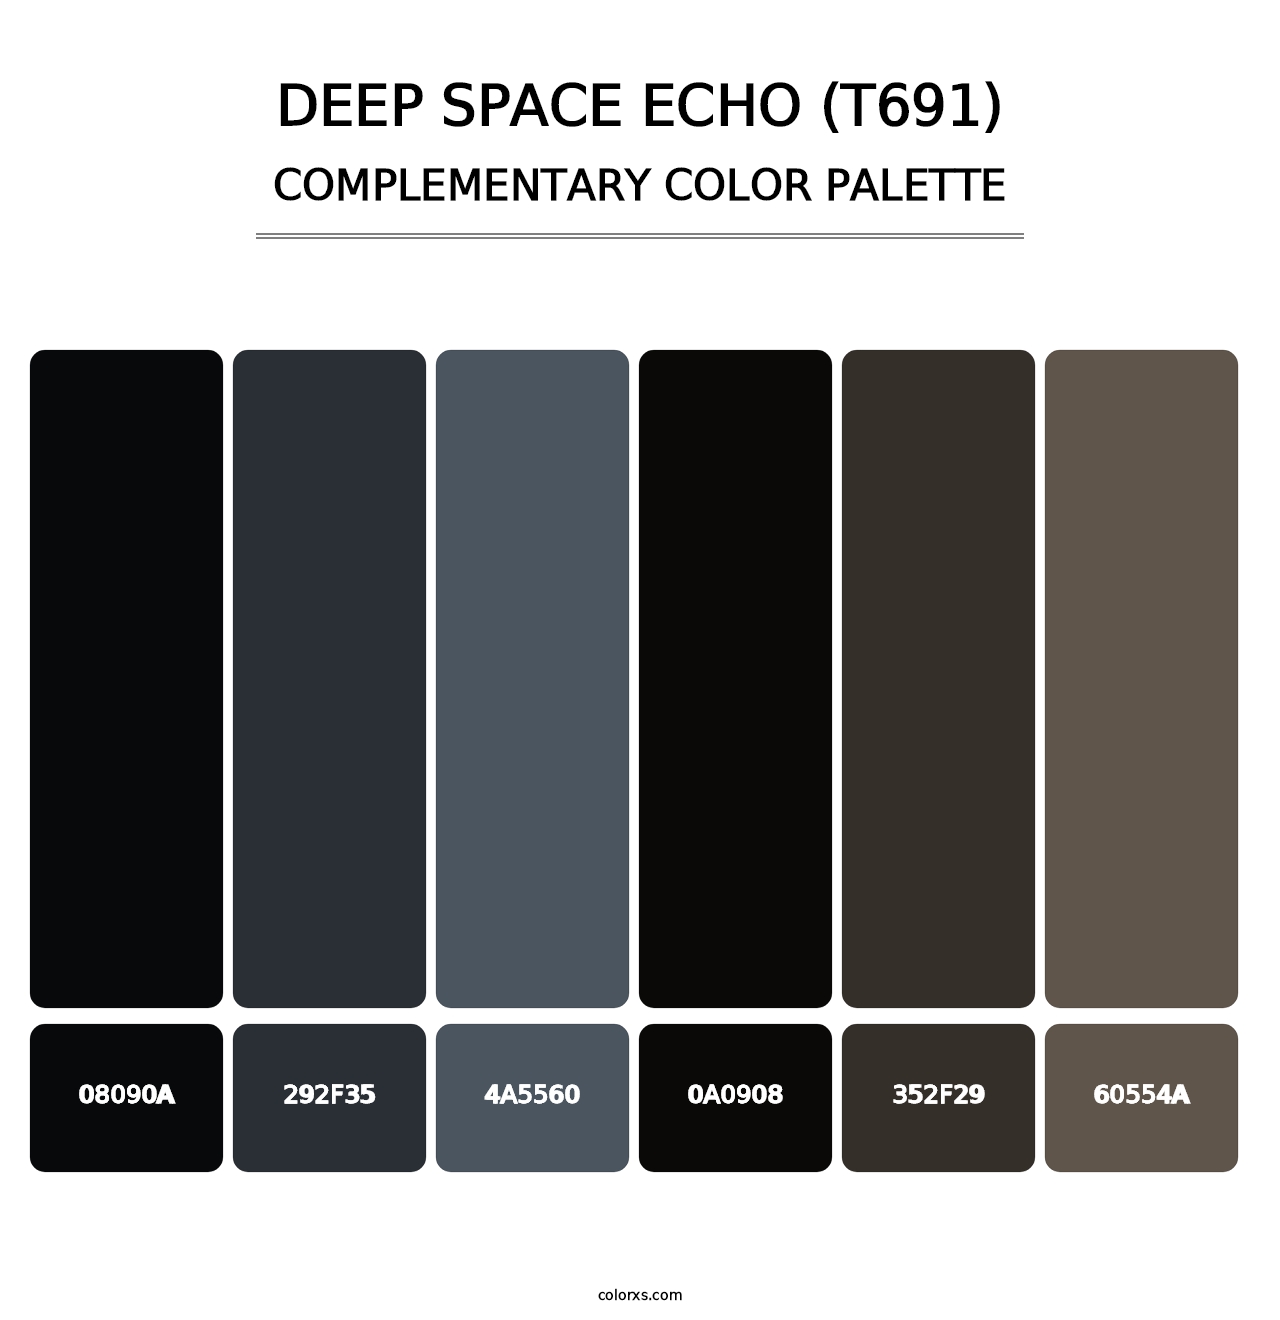 Deep Space Echo (T691) - Complementary Color Palette